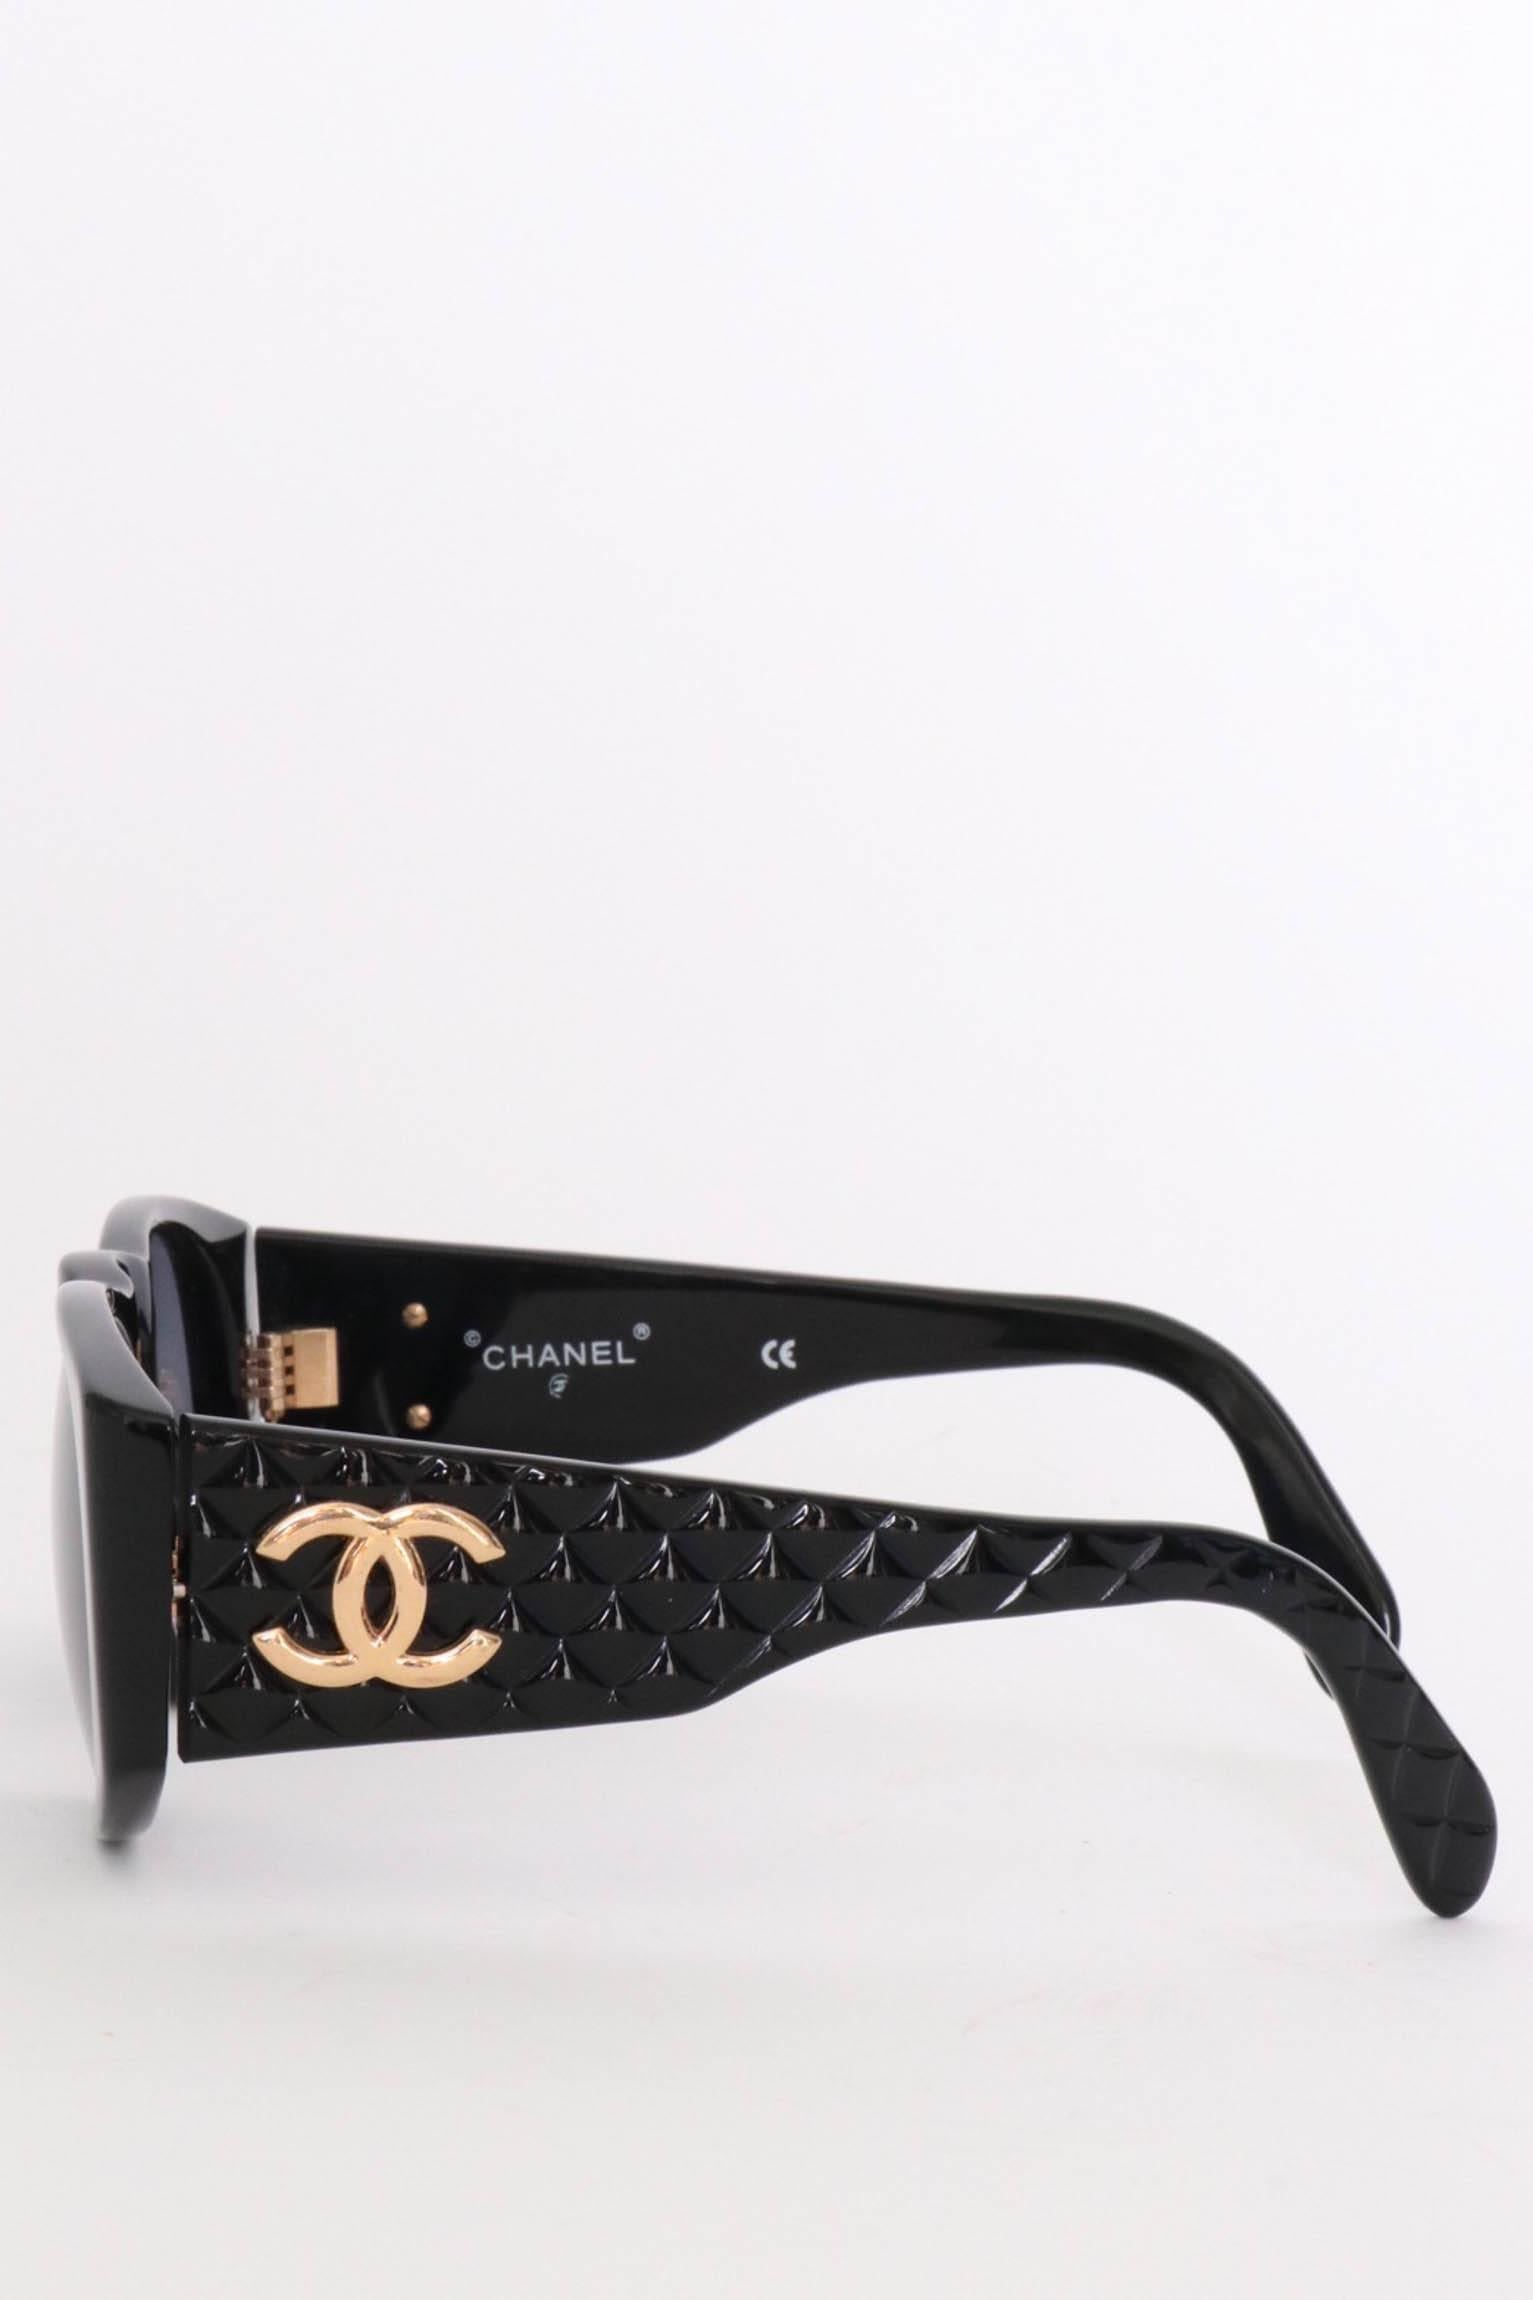 A pair of 1980s Chanel sunglasses with quilted sides, square frames and a large gold-toned Chanel double 'cc' logo situated on both temples. 

The sunglasses have the following measurements:
Temple length: 12.5 cm
Bridge size: 1 cm
Eye size: 6 cm 